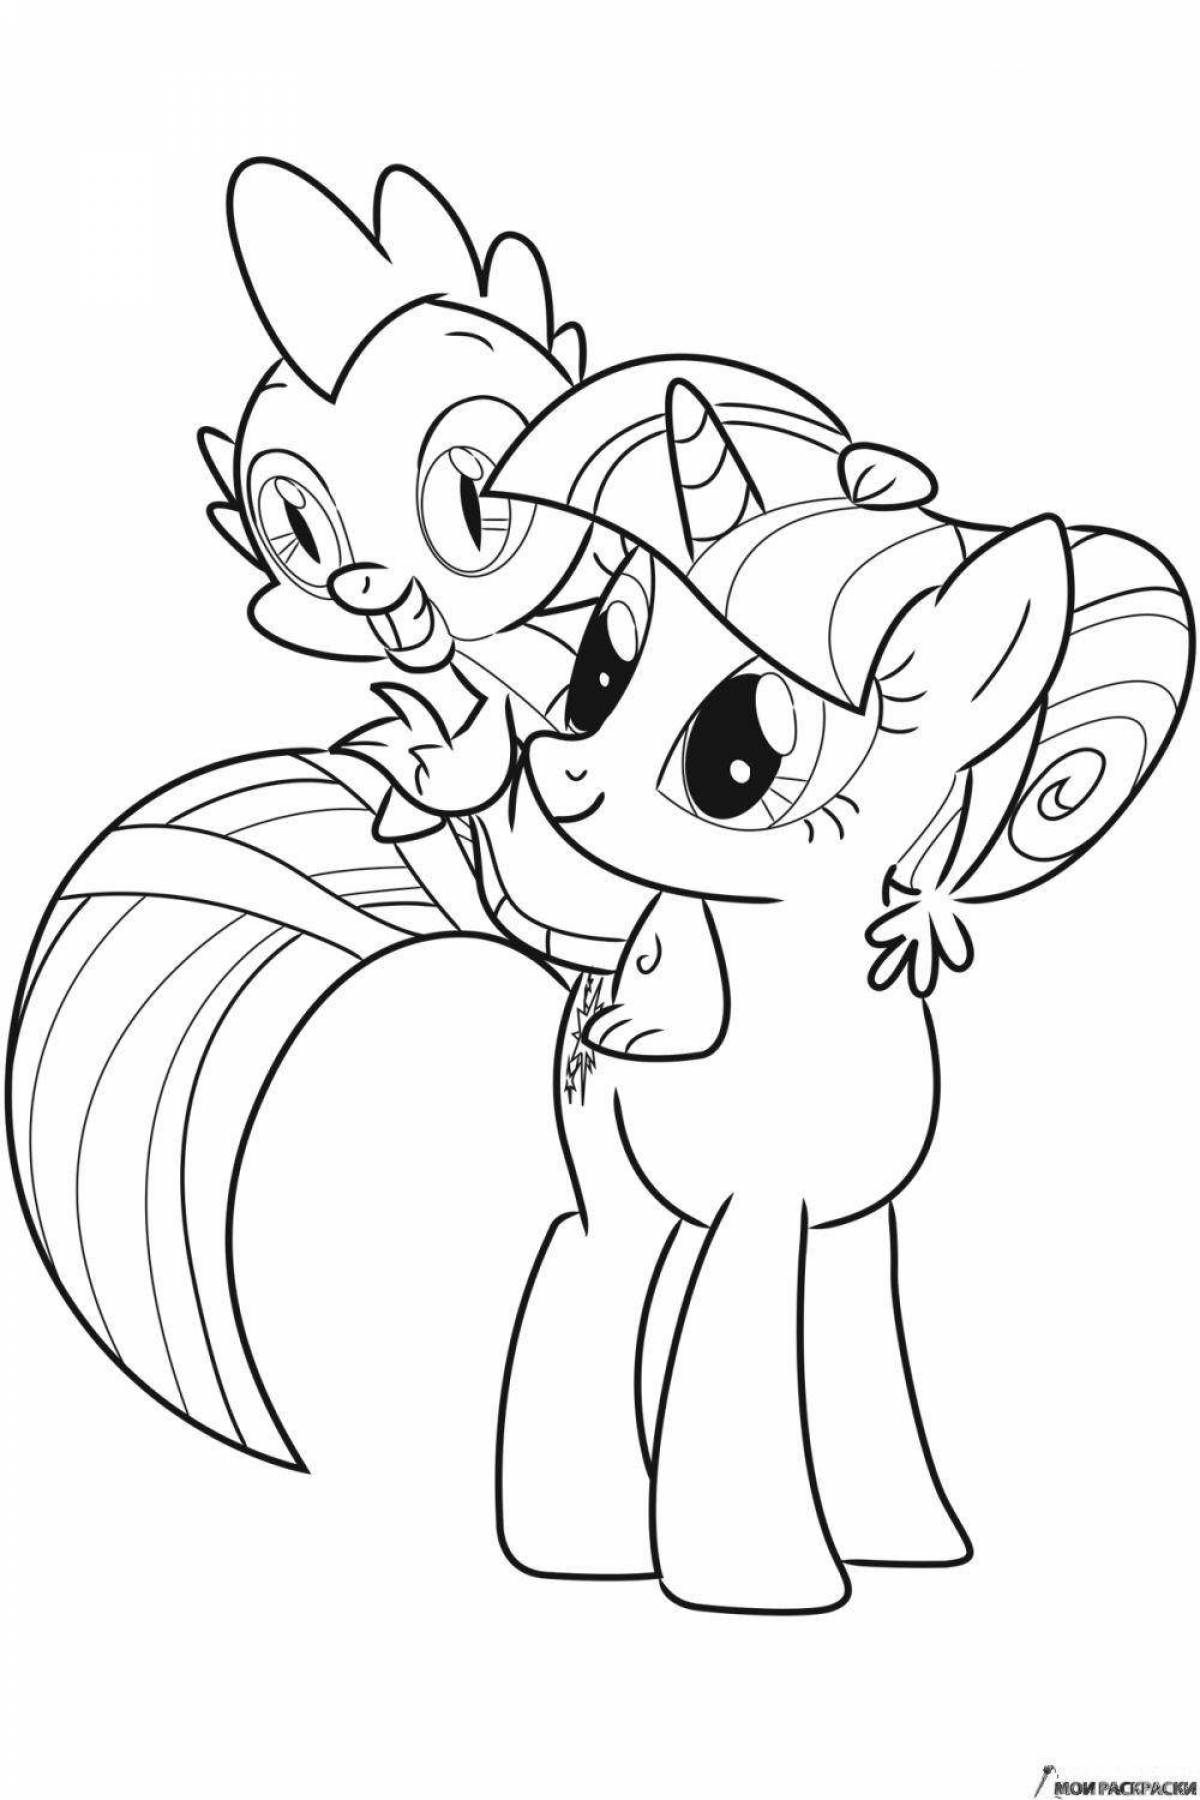 Colorful twilight sparkle coloring page